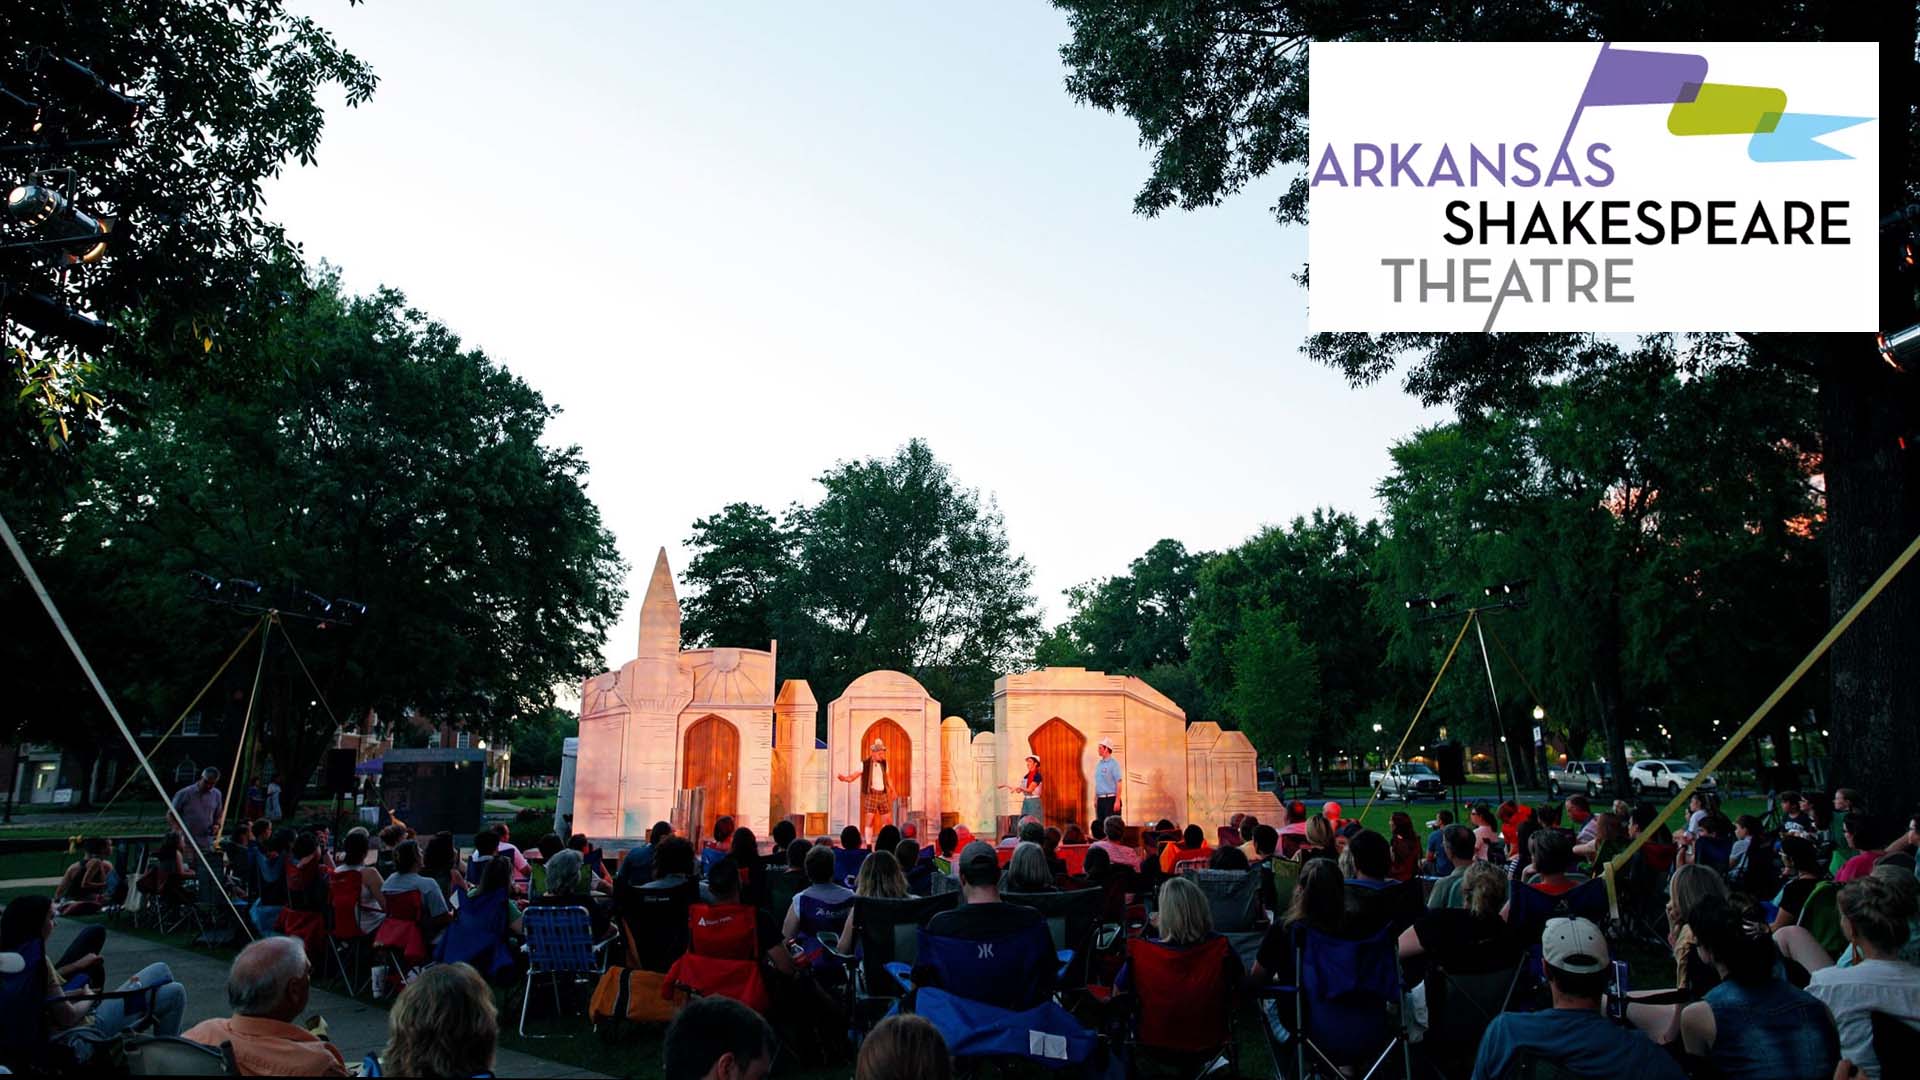 The Arkansas Shakespeare Theatre (AST) announces the cancellation of the 2021 summer festival.